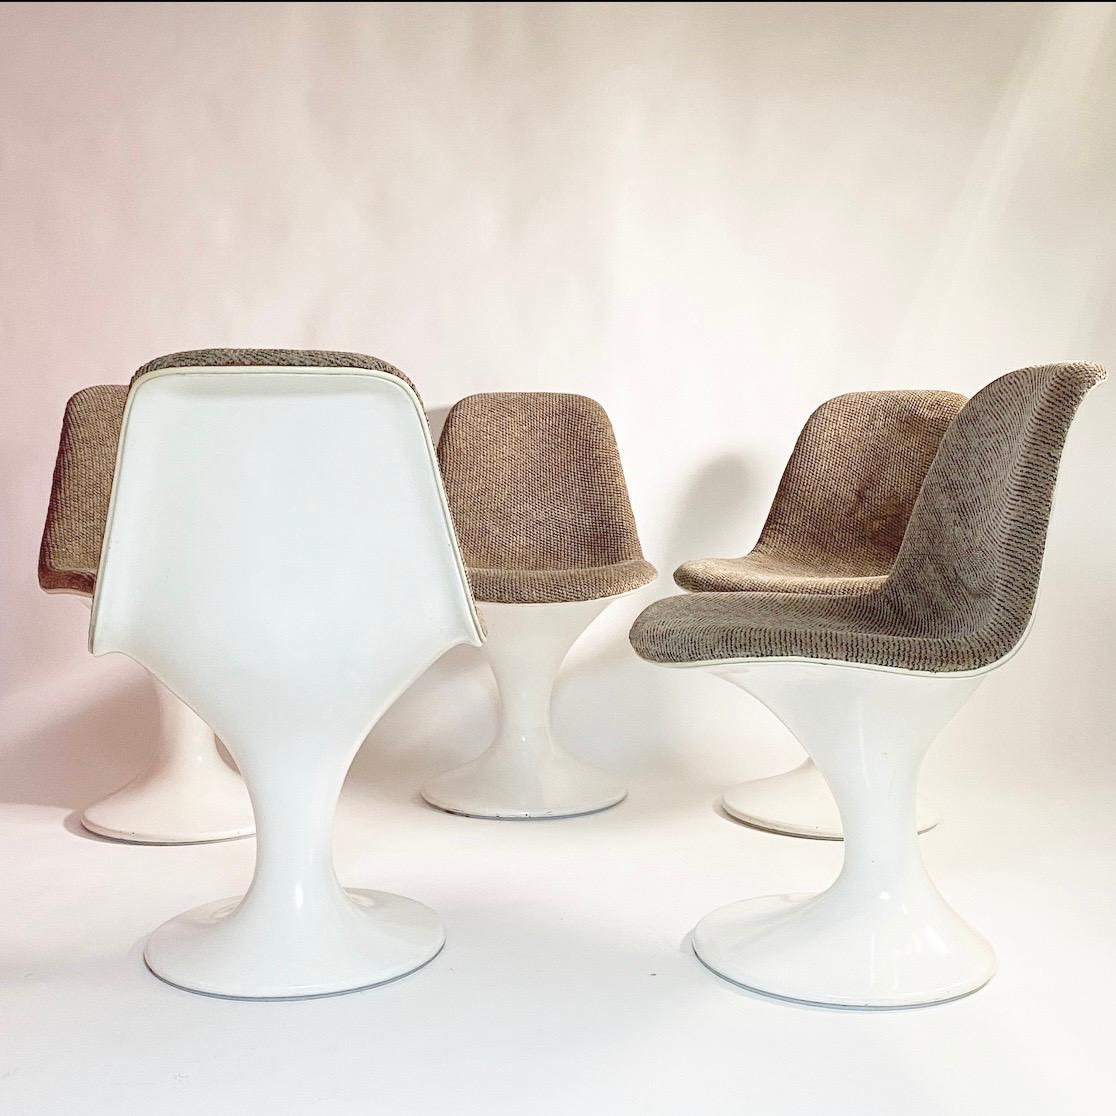 Set of Five Orbit Chairs and Original Dining Table by Vitra, Germany, 1965 In Good Condition For Sale In Haderslev, DK